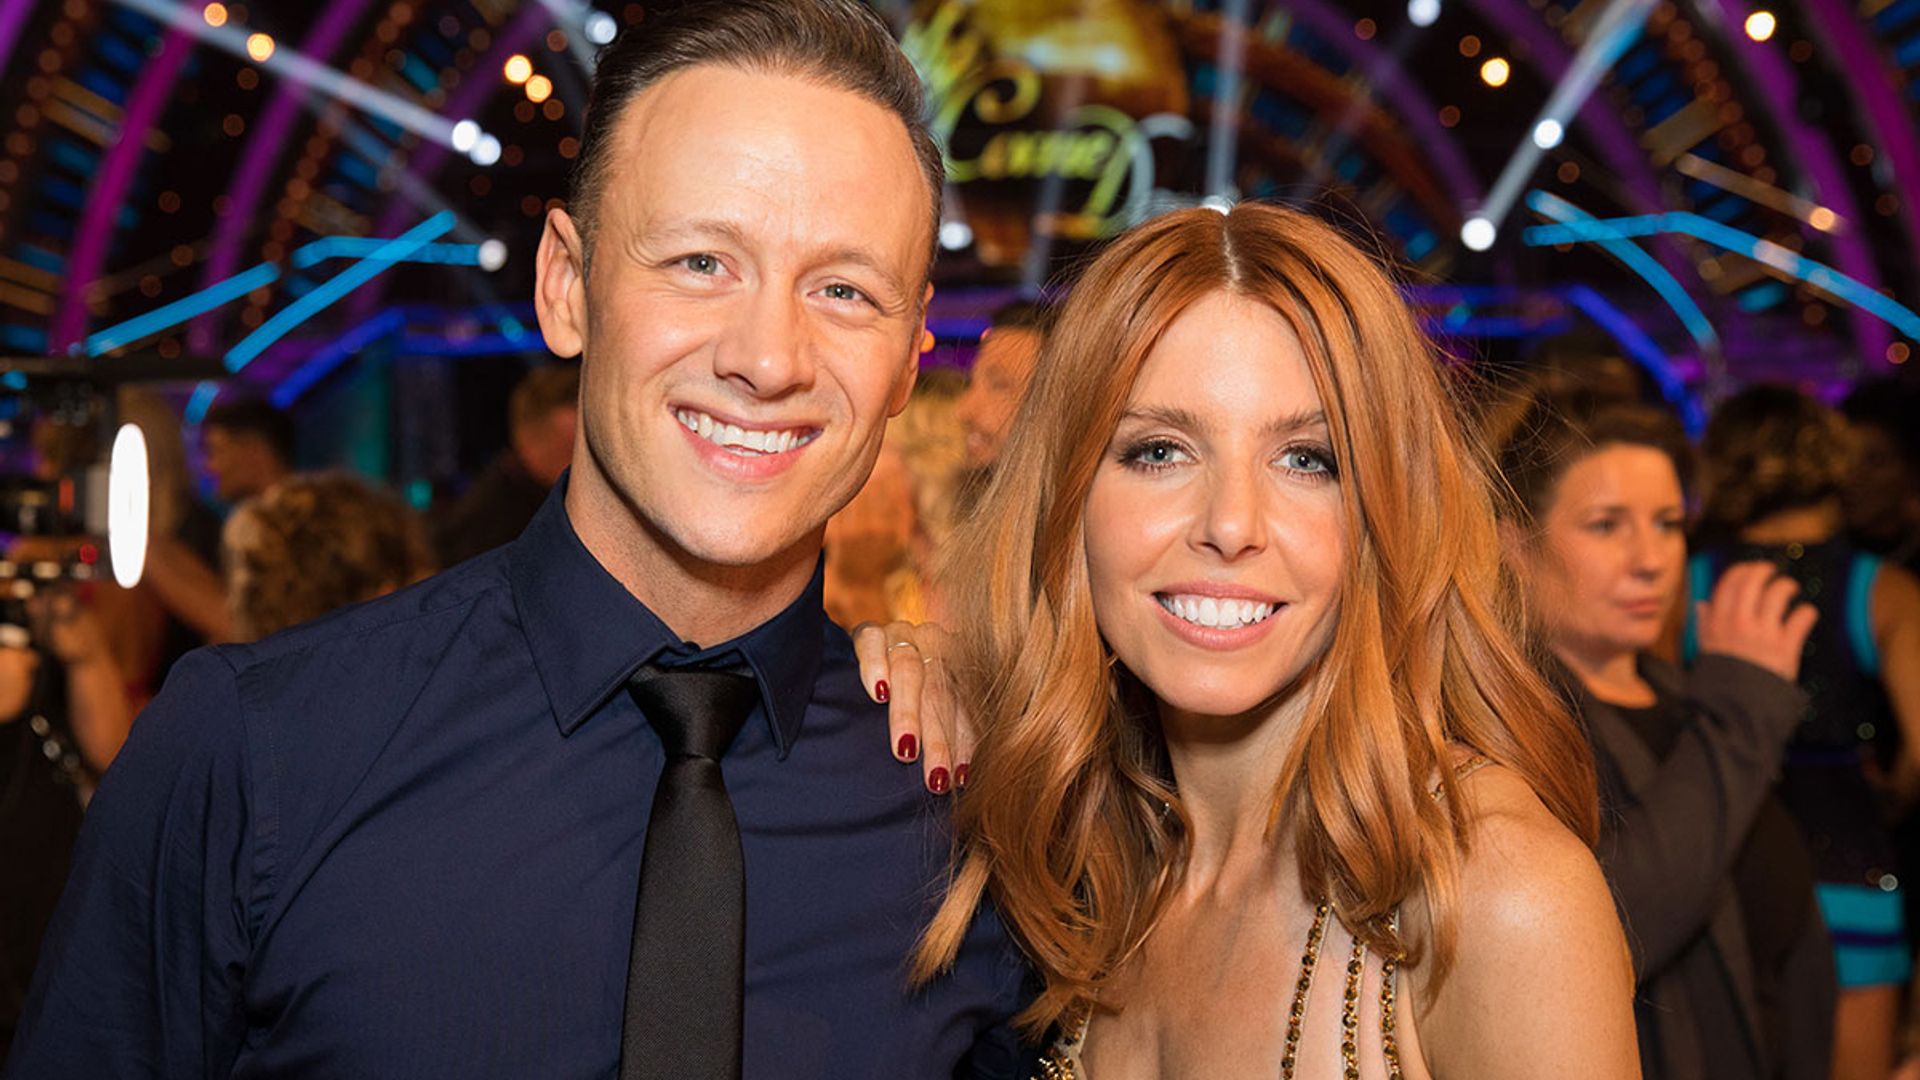 kevin-clifton-stacey-dooley